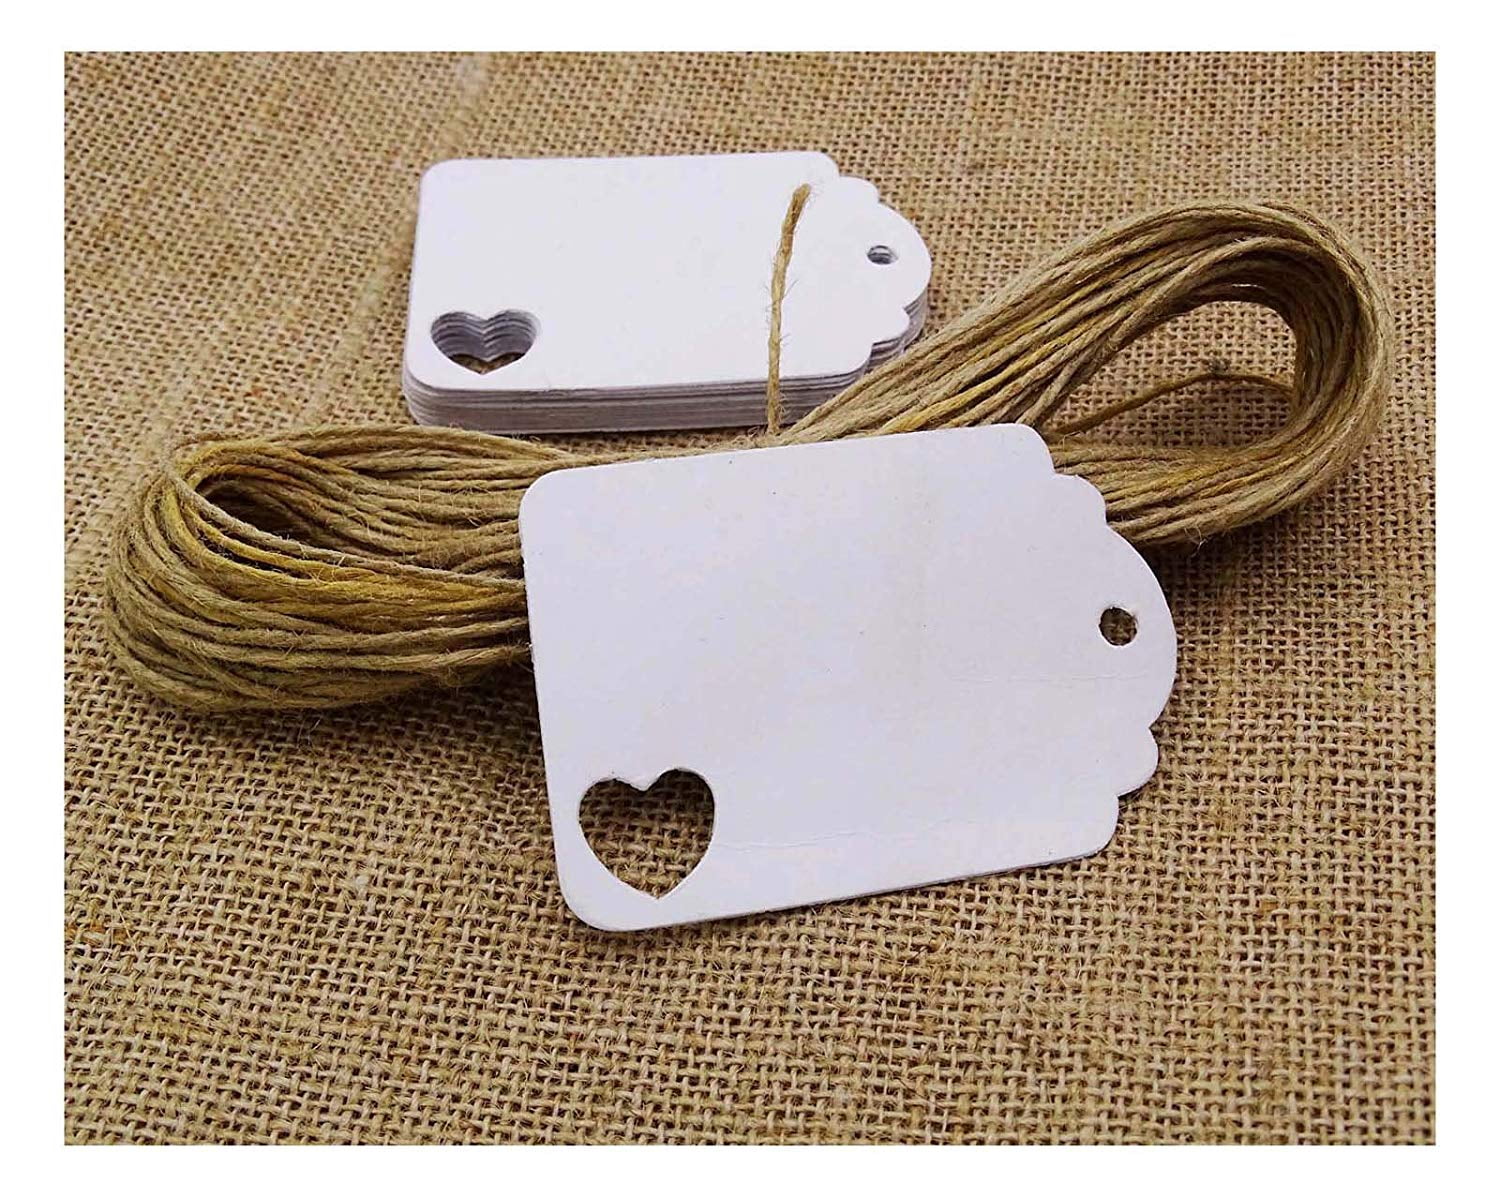 Details about   100Pcs White Blank Label Price Tags Hanging With Elastic Tied String Supplies 